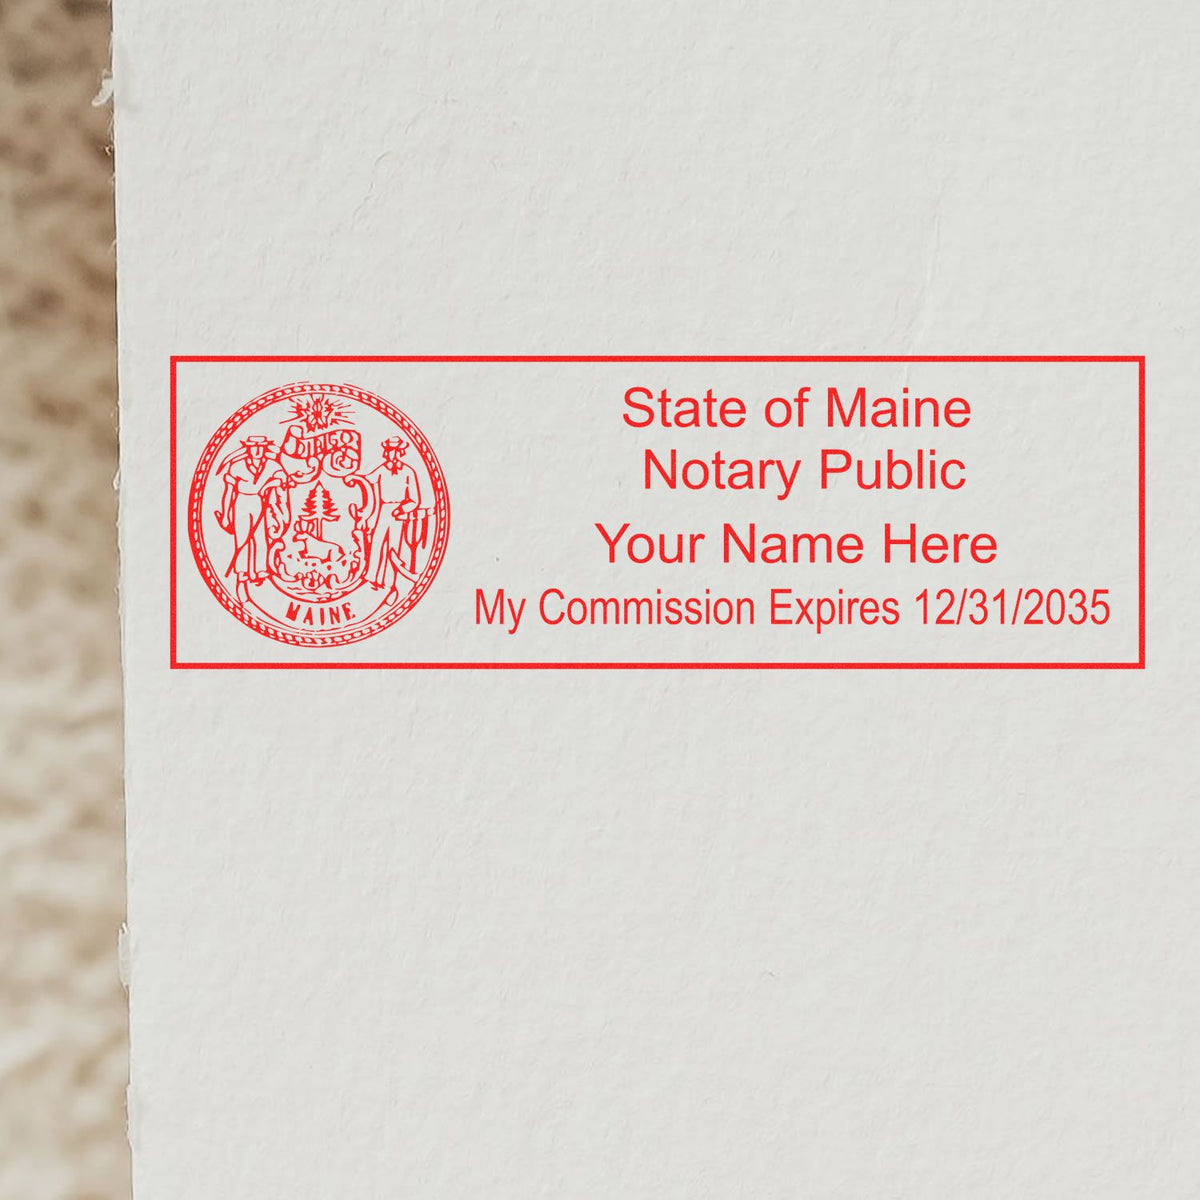 The Heavy-Duty Maine Rectangular Notary Stamp stamp impression comes to life with a crisp, detailed photo on paper - showcasing true professional quality.